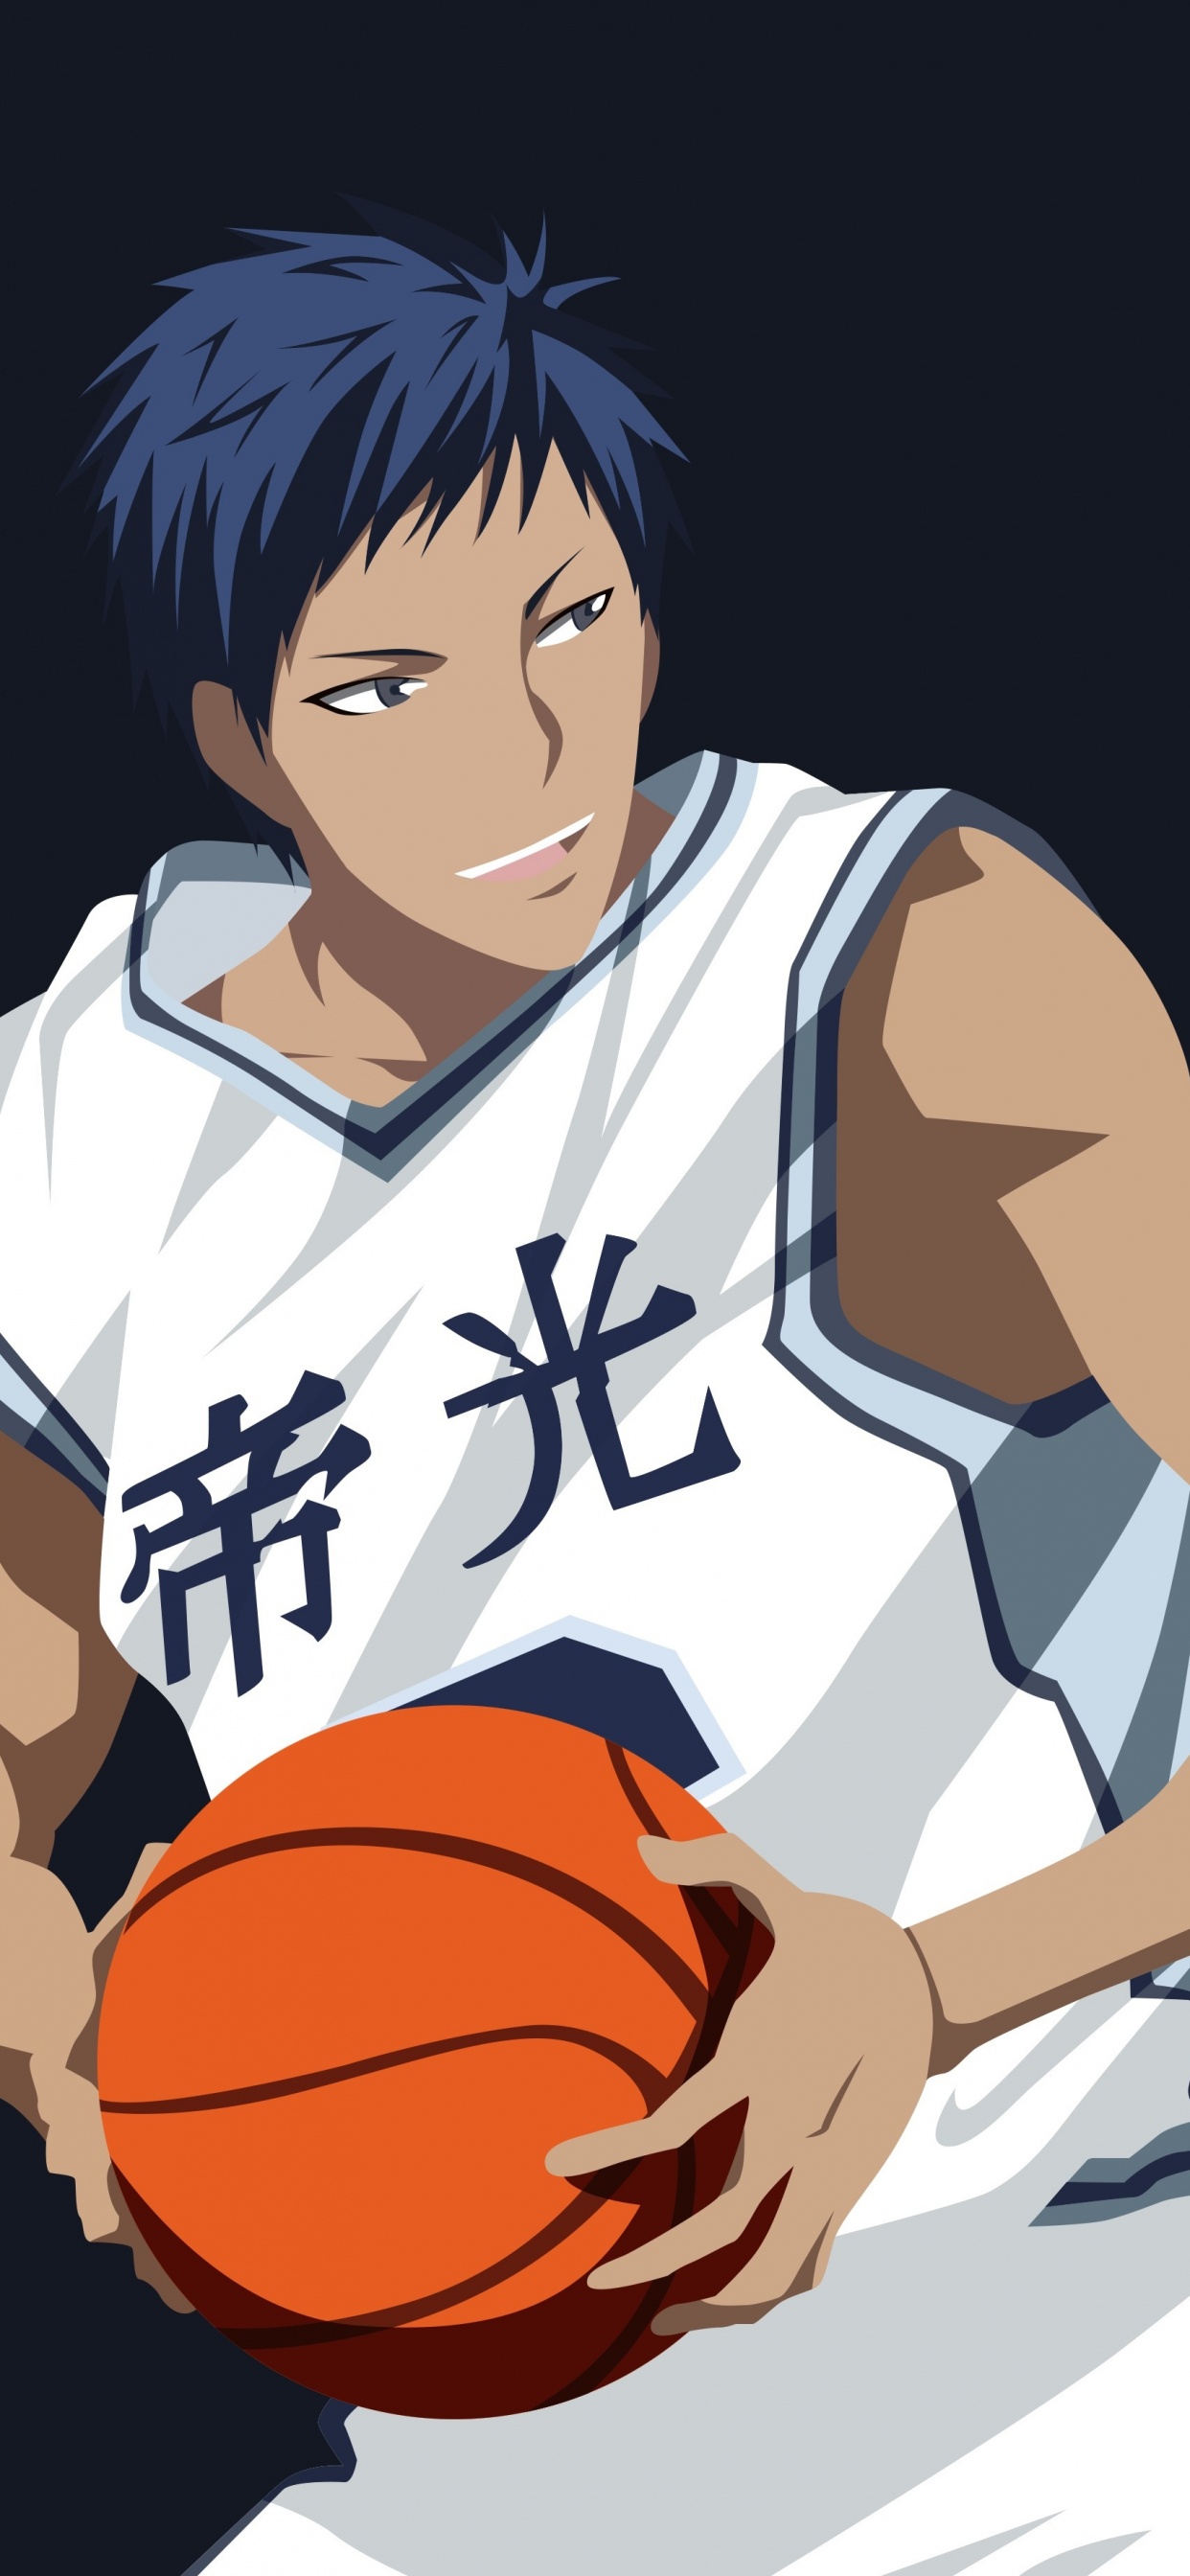 Personnage D'anime Masculin Aux Cheveux Noirs Tenant le Basket-ball. Wallpaper in 1242x2688 Resolution